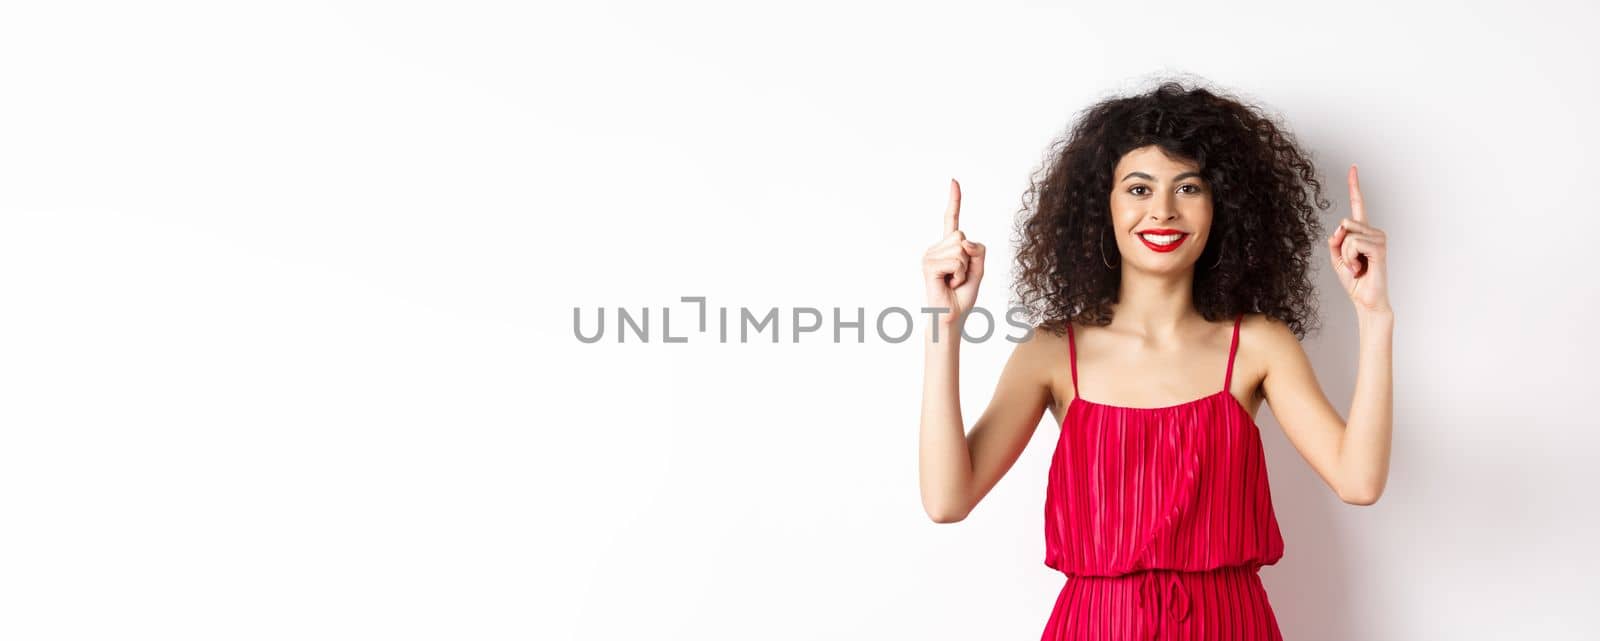 Smiling woman in elegant red dress and makeup, pointing fingers up and showing promo offer on valentines day, standing over white background.